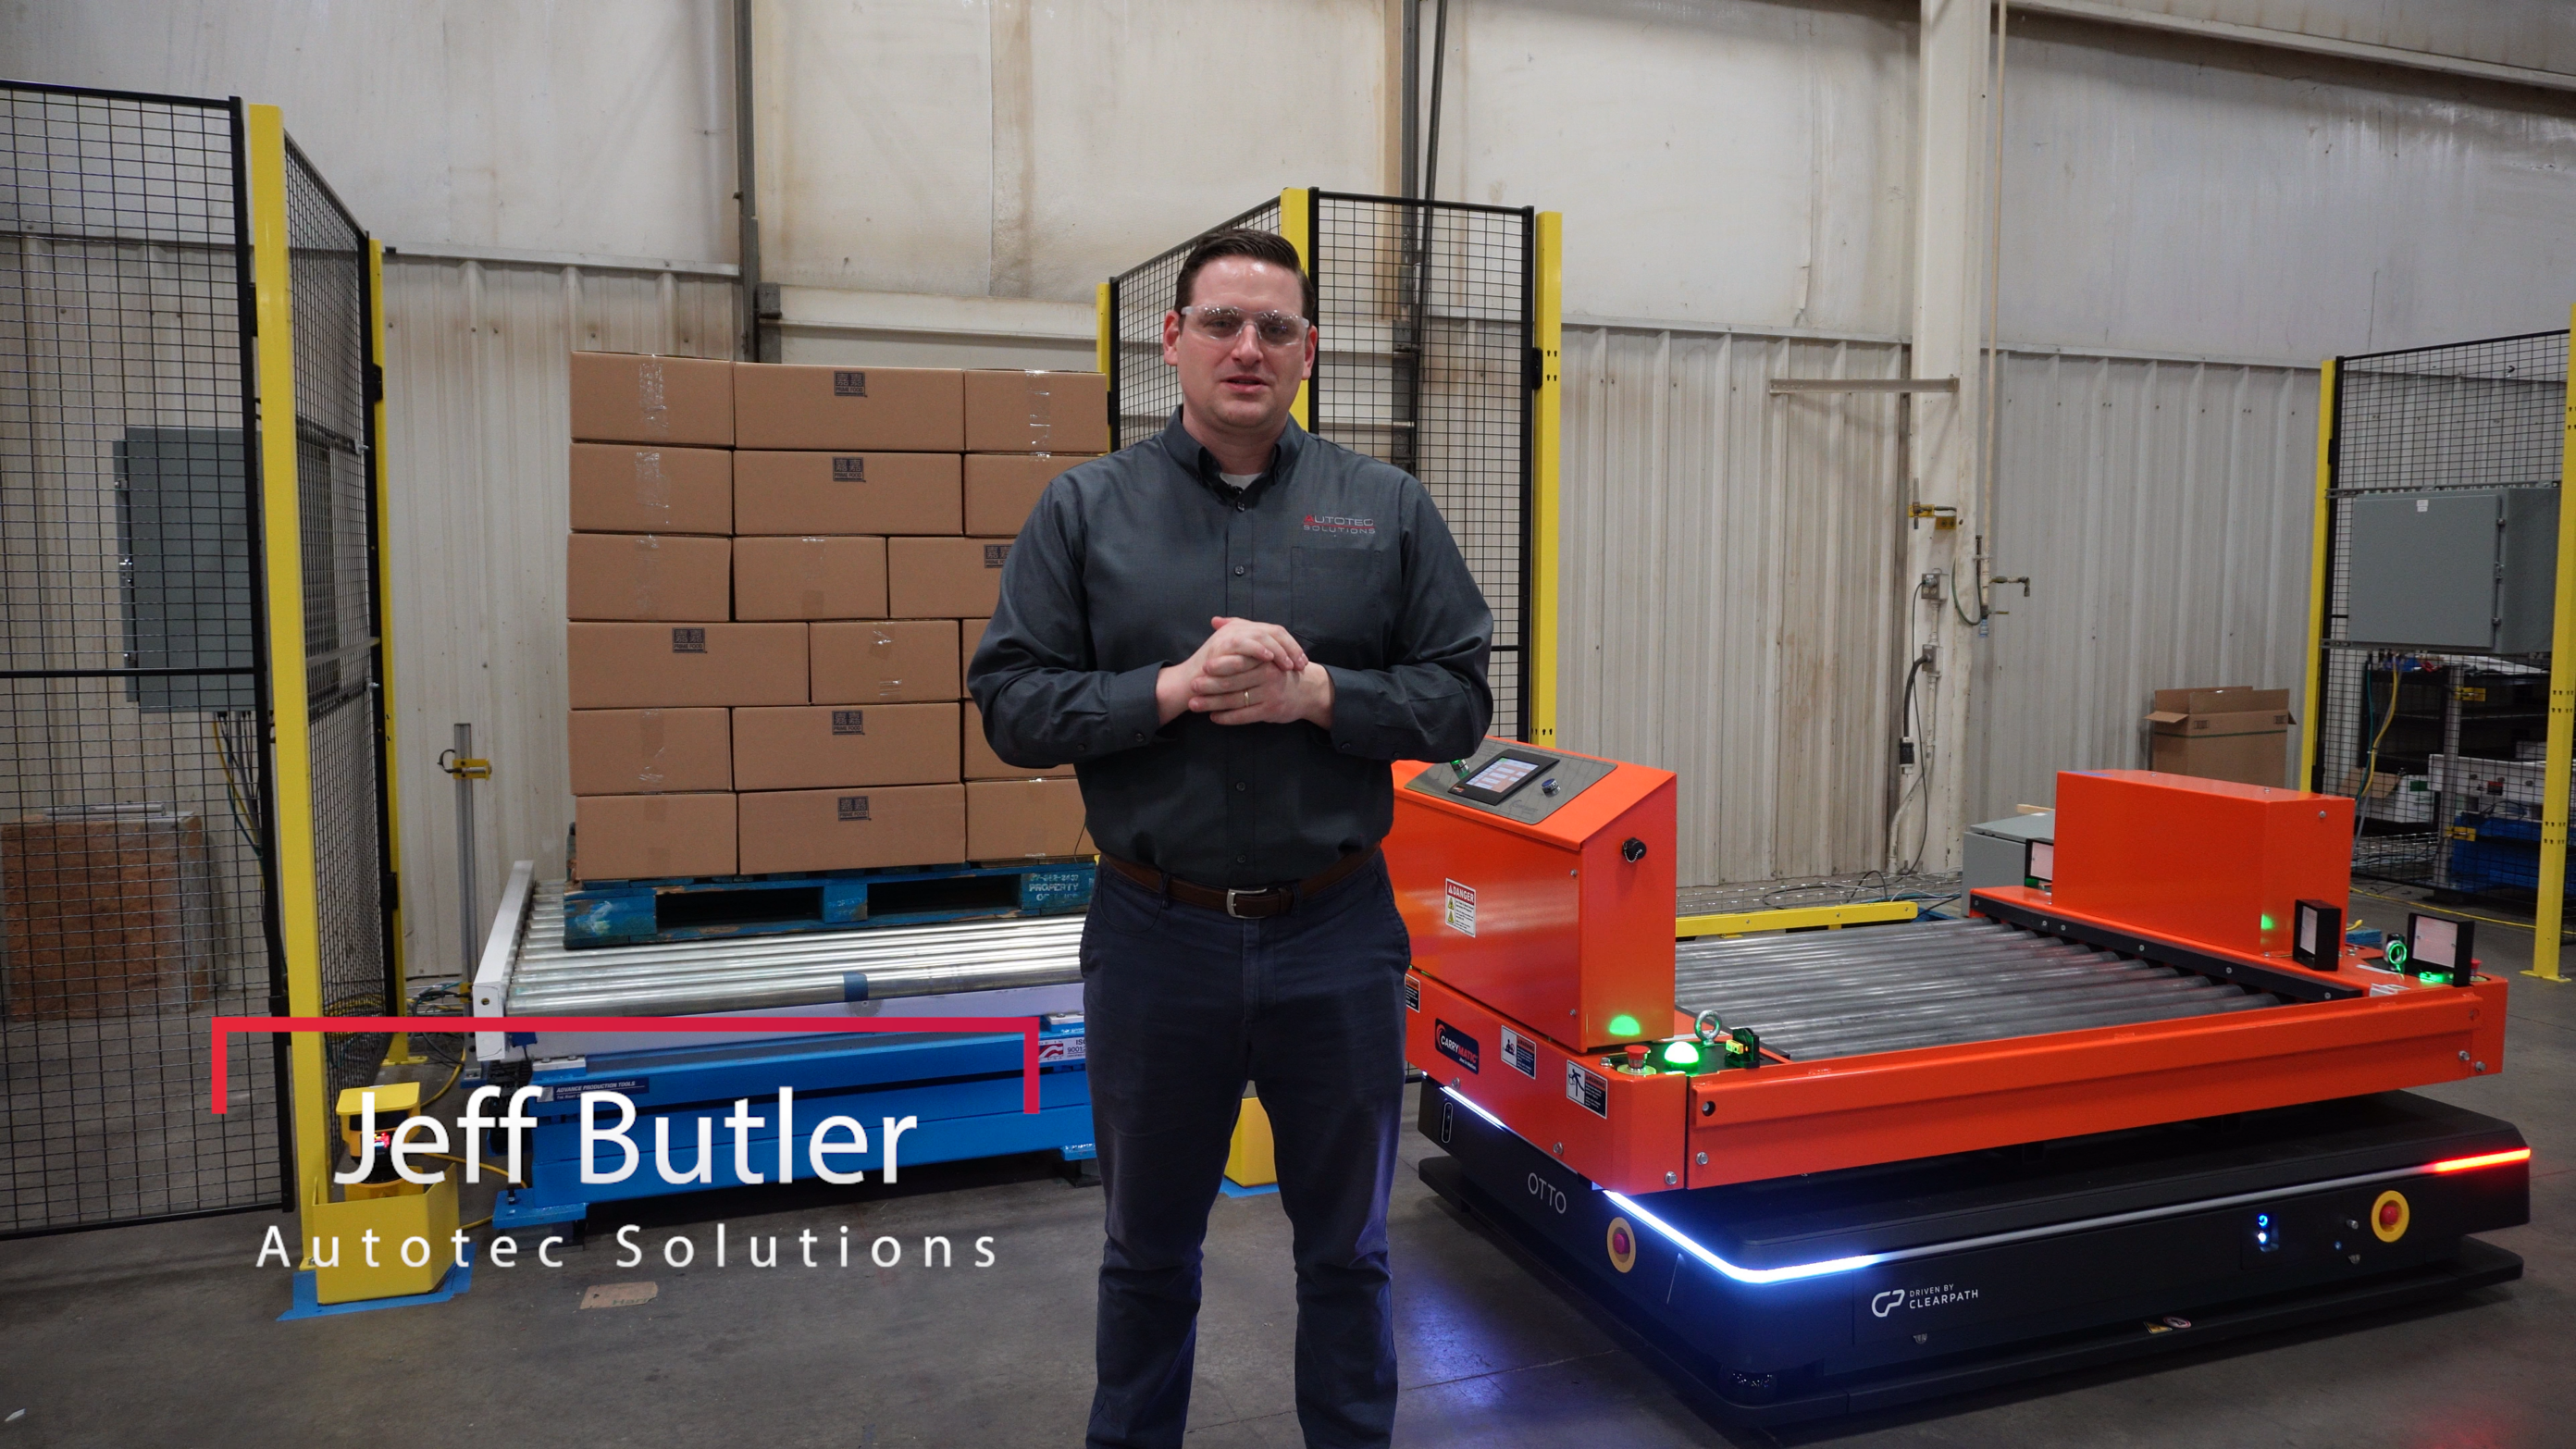 Autotec Solutions Presents New Automated Warehouse Systems with AMRs